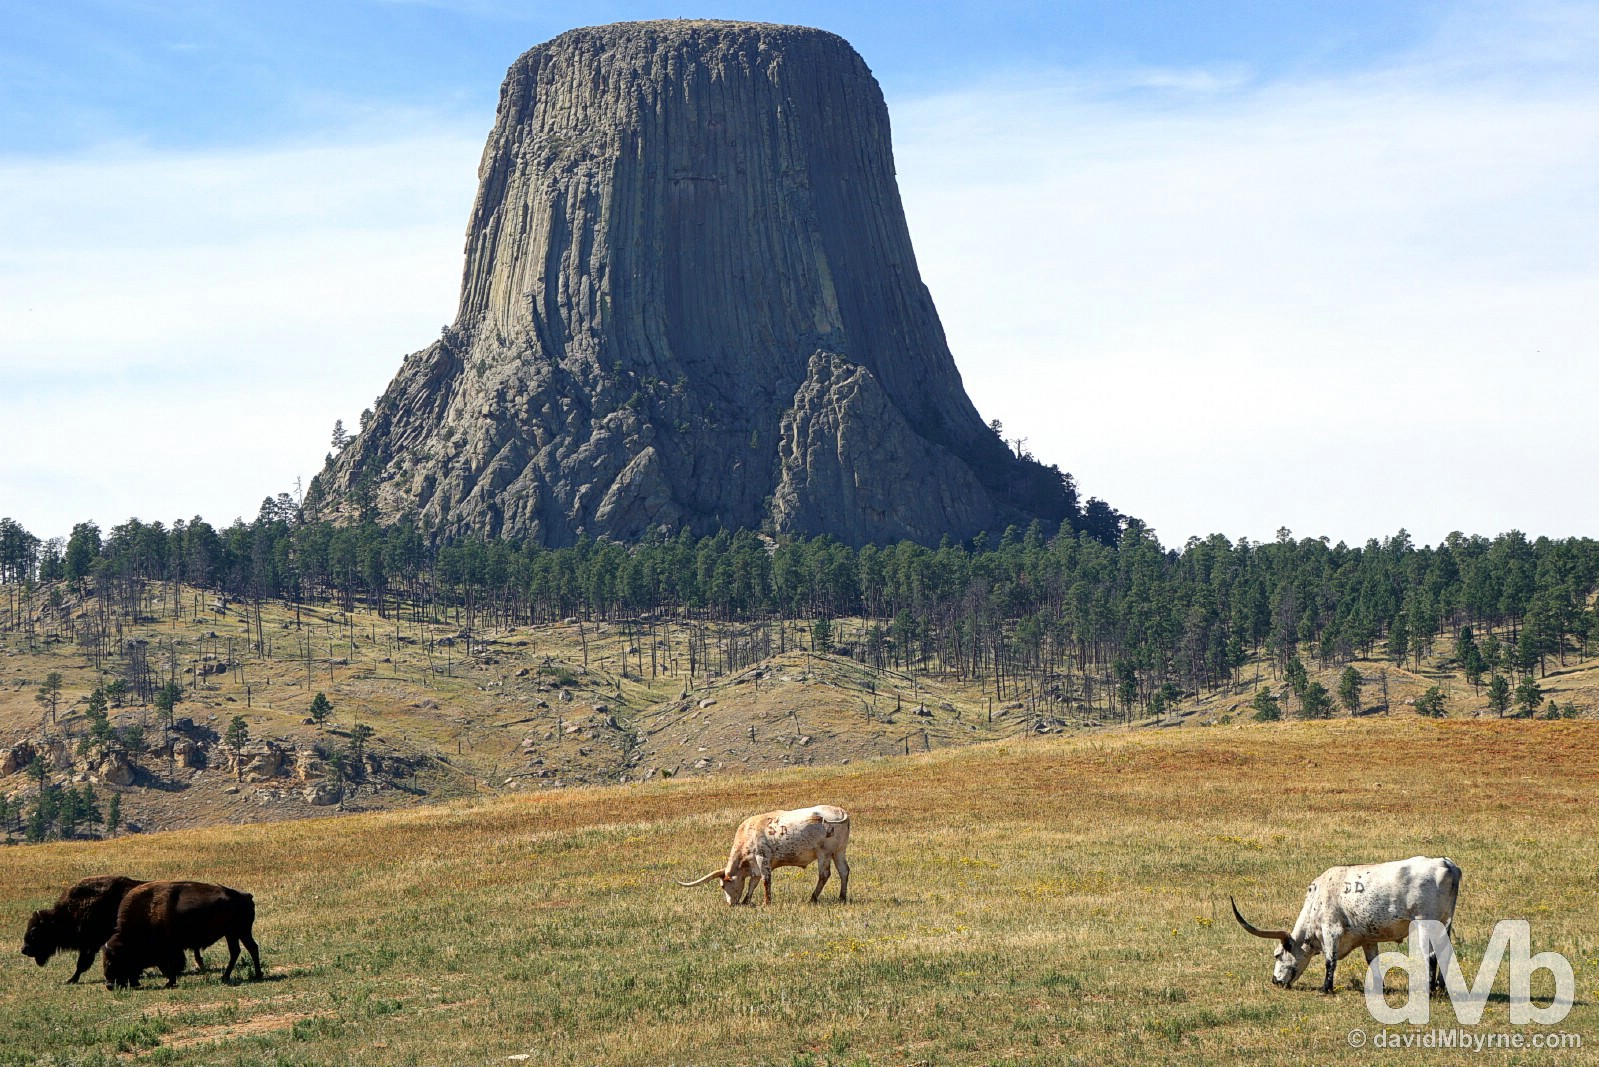 Grazing in front of the Devils Tower National Monument, designated in 1906 as the very first national monument in the US. Crook County, Wyoming, USA. September 3, 2016.